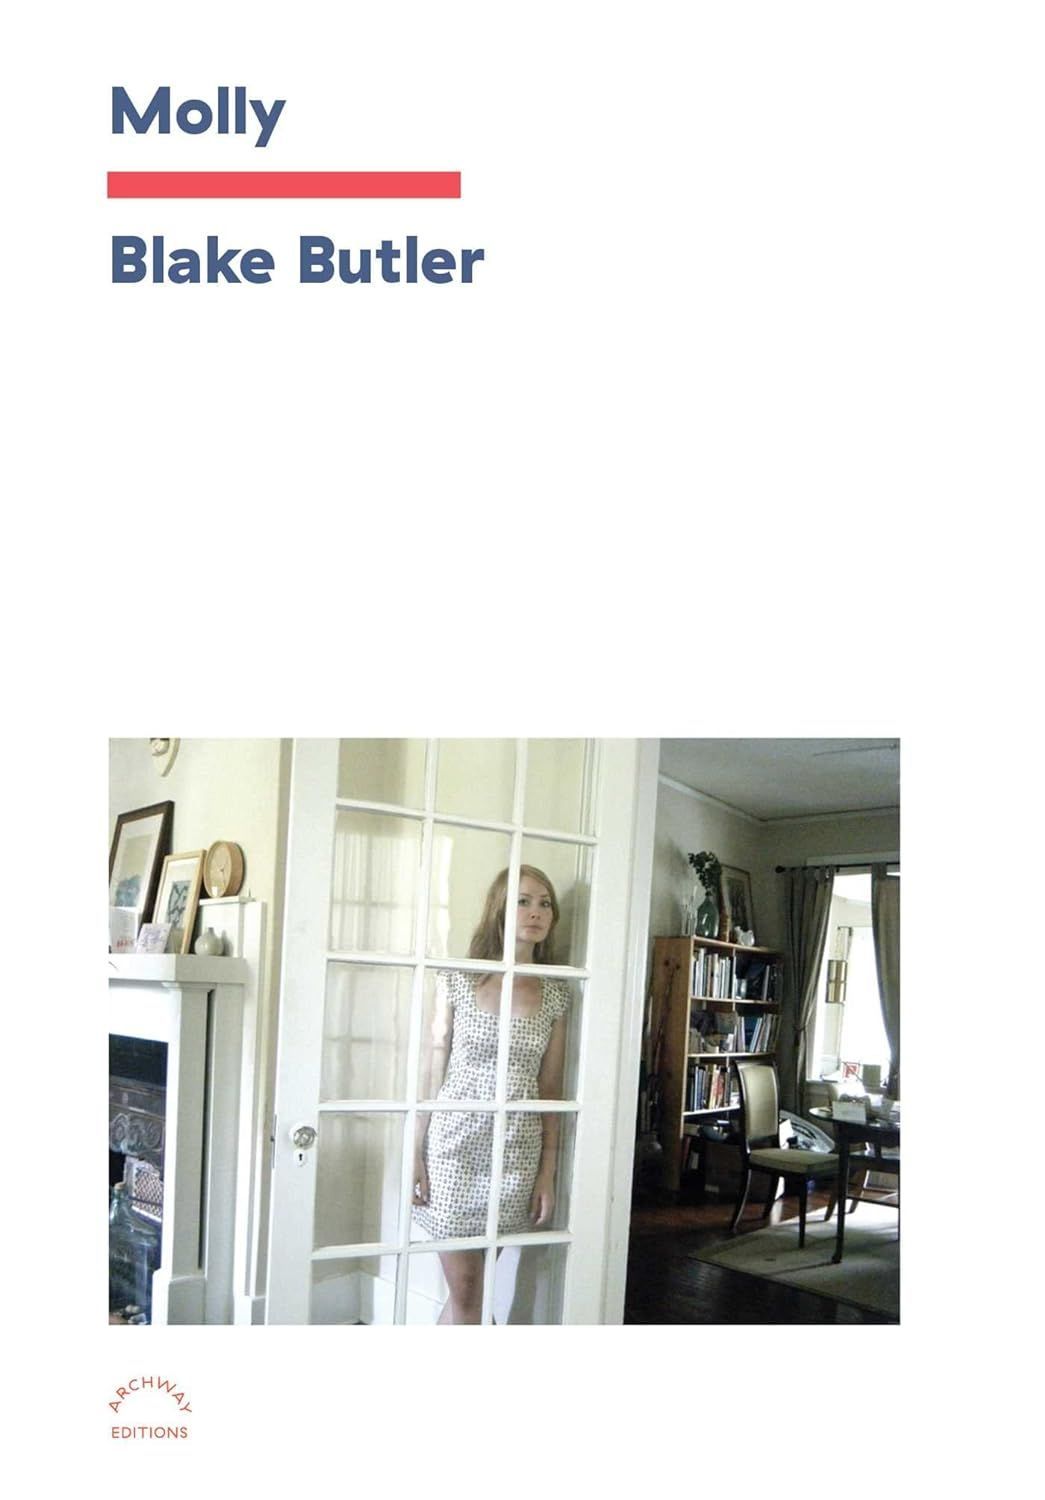 Who Gets to Name What’s Evil? On Blake Butler’s “Molly”